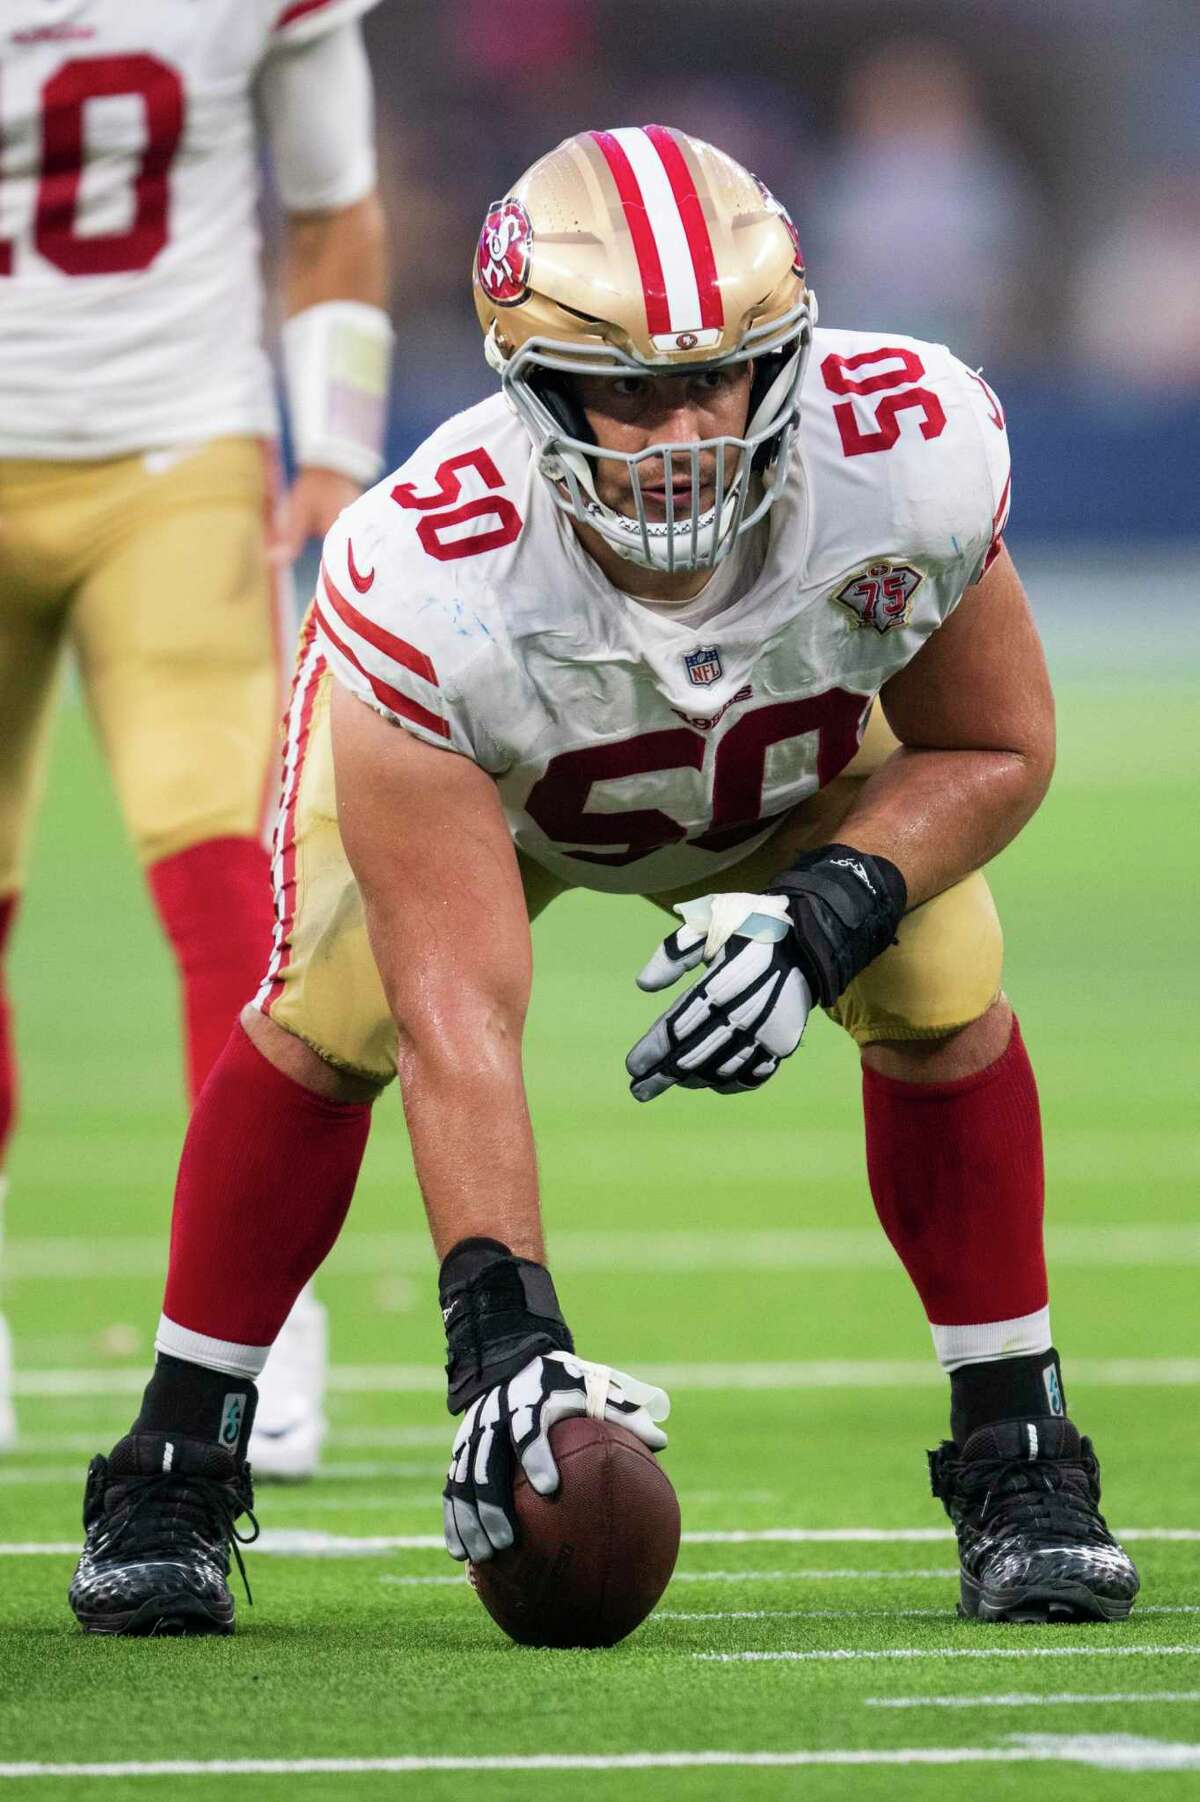 San Francisco 49ers center Alex Mack (50) gets ready to snap the ball during an NFL football game against the Los Angeles Rams Sunday, Jan. 9, 2022, in Inglewood, Calif. (AP Photo/Kyusung Gong)